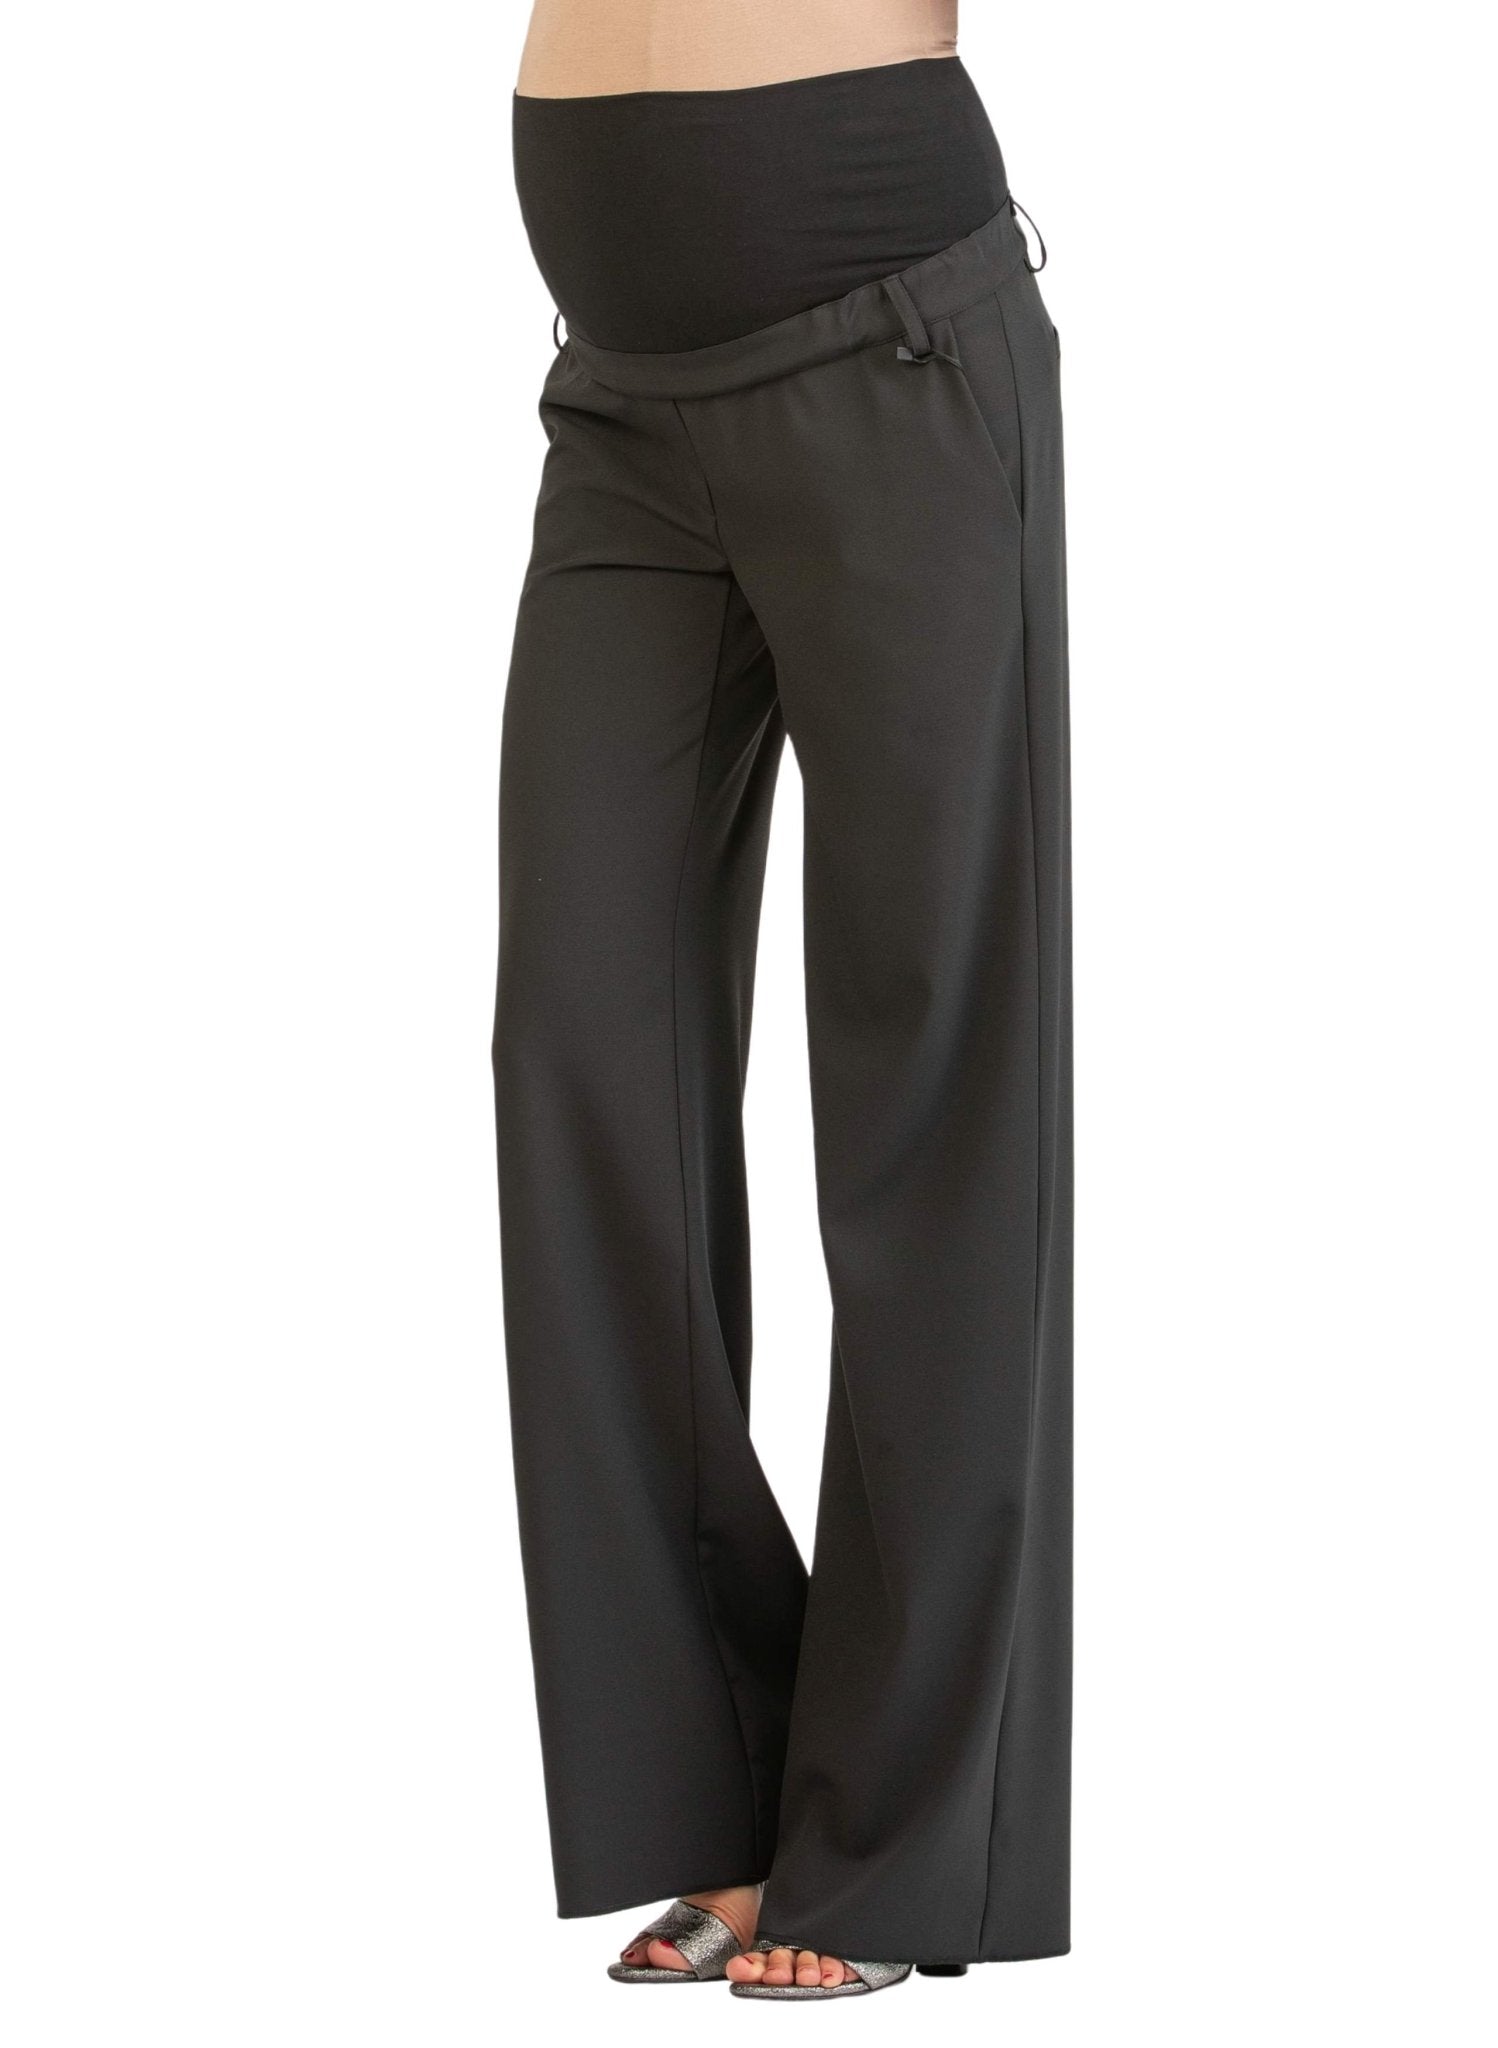 Palazzo Maternity Trousers - Black - Mums and Bumps